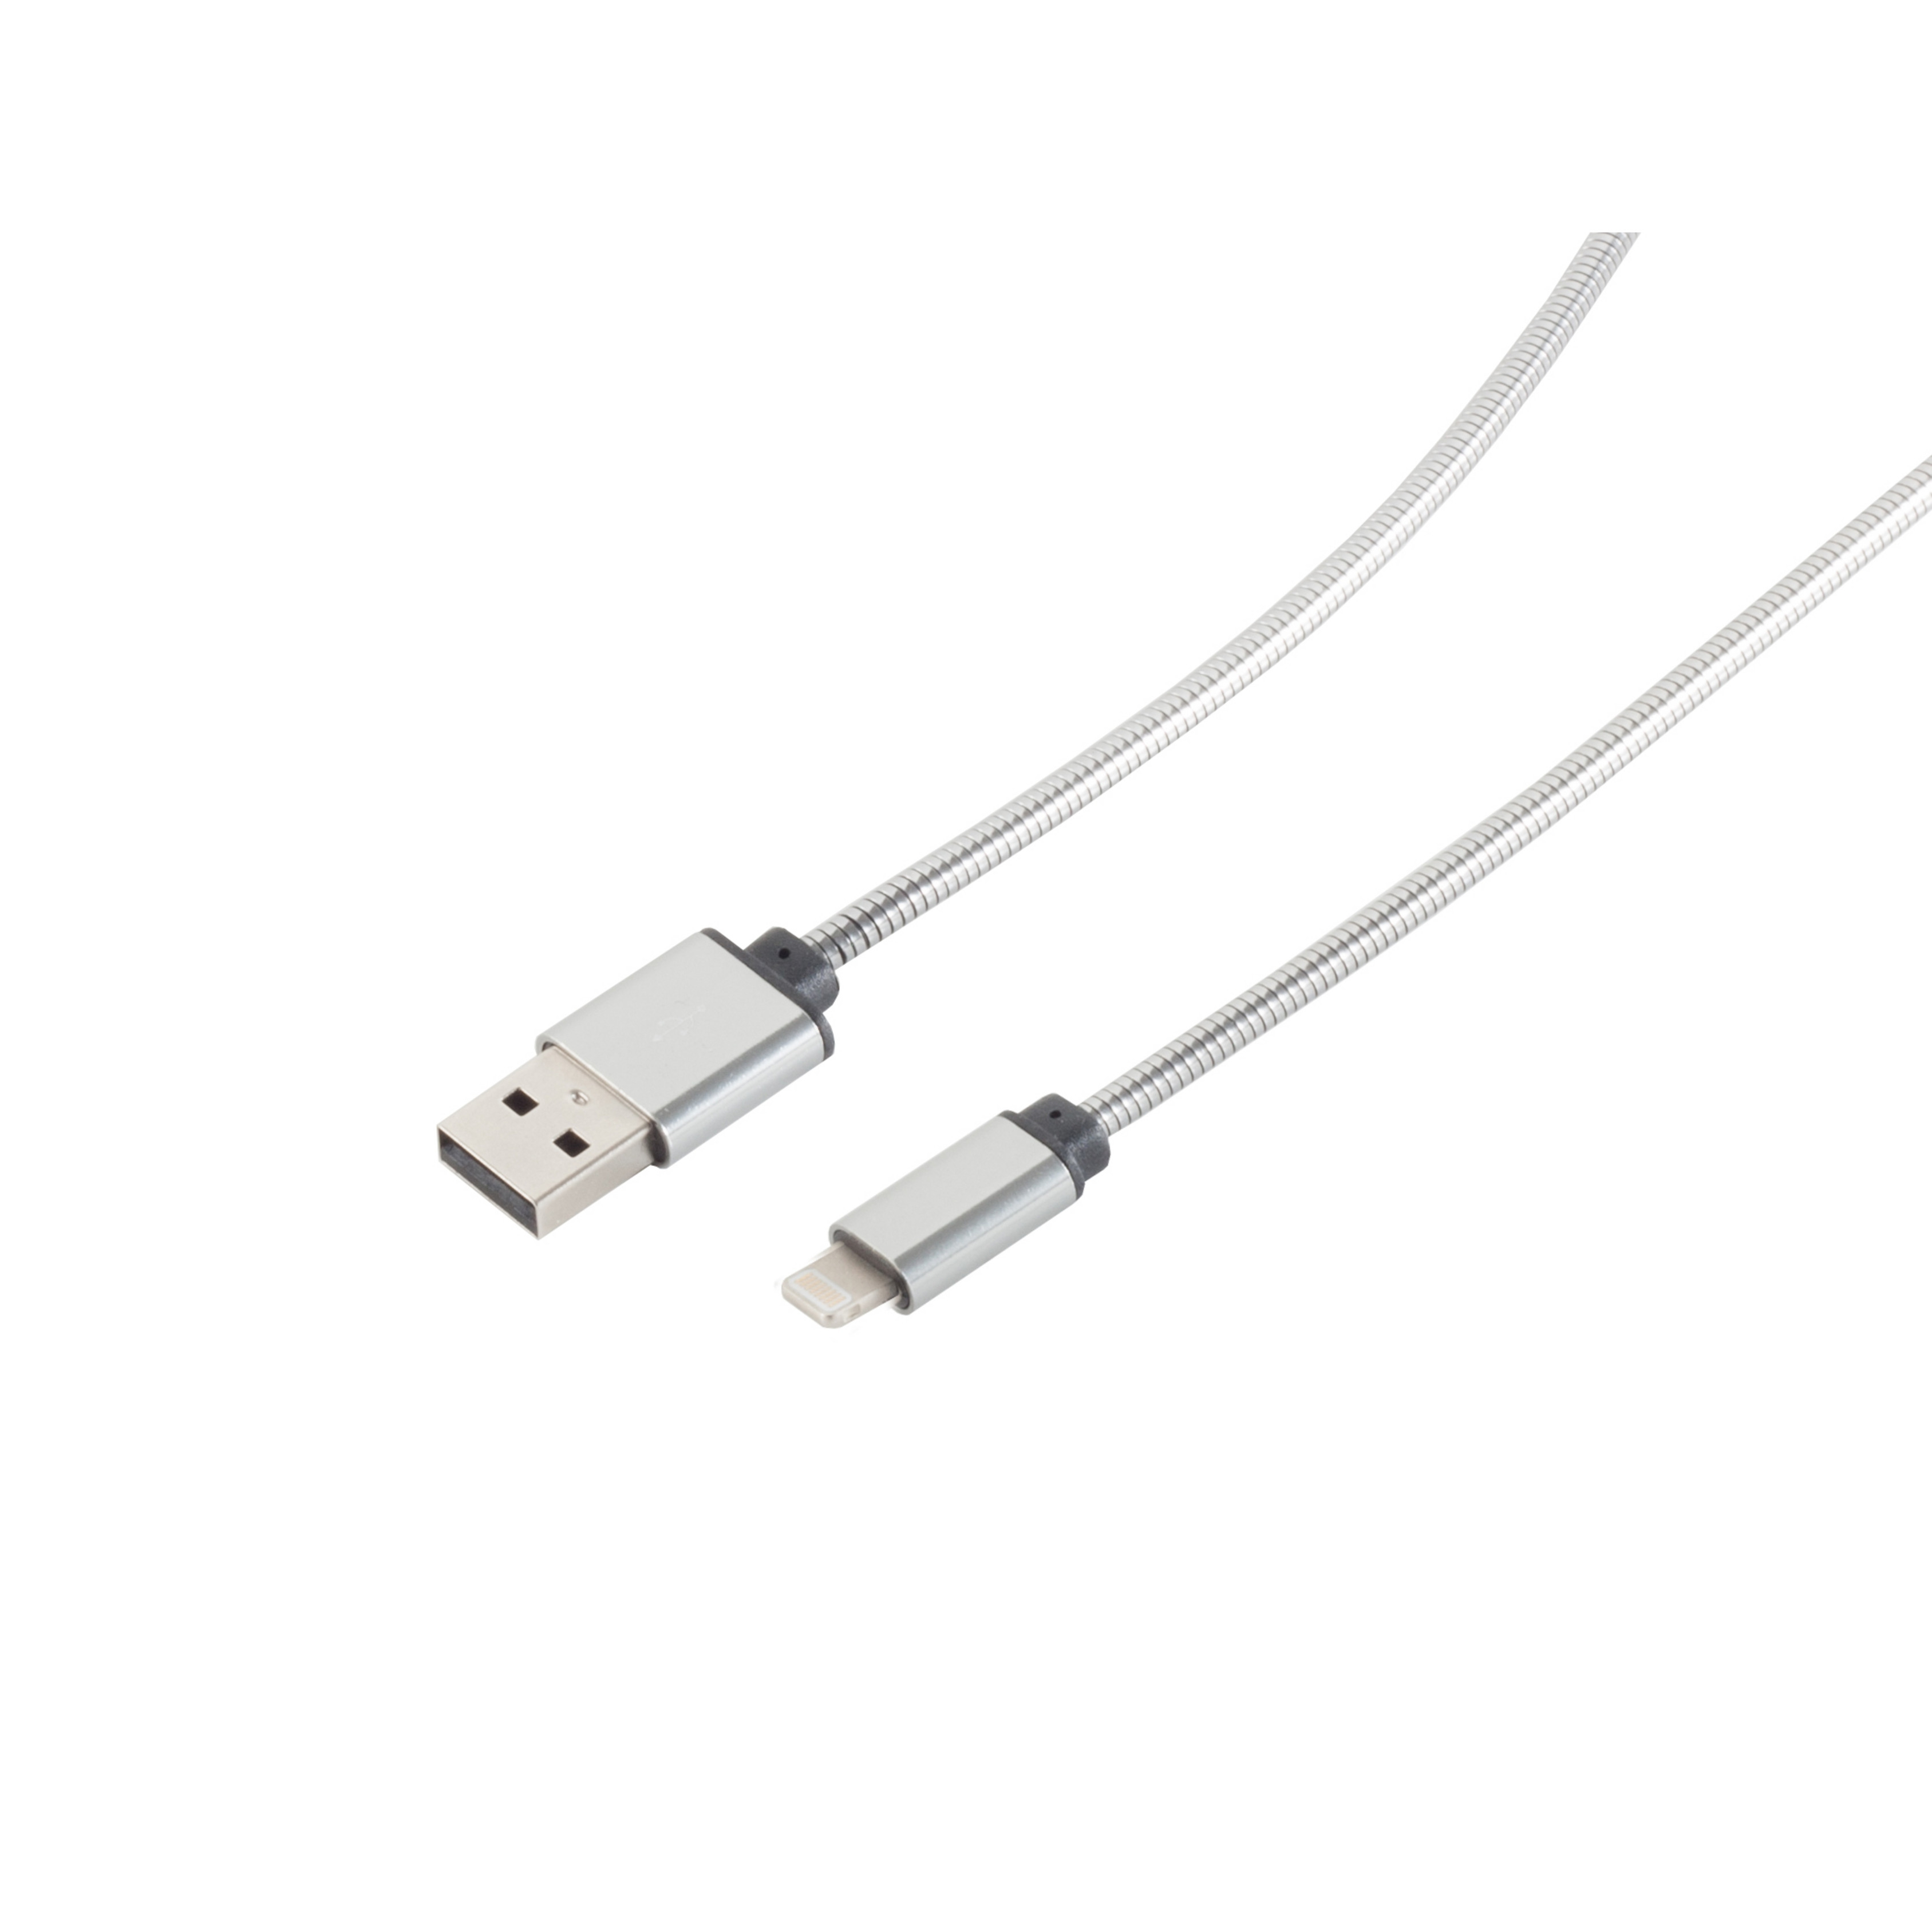 Kabel Silber MAXIMUM S/CONN CONNECTIVITY Steel Kabel 1m USB 8-pin Lade-Sync USB USB A/